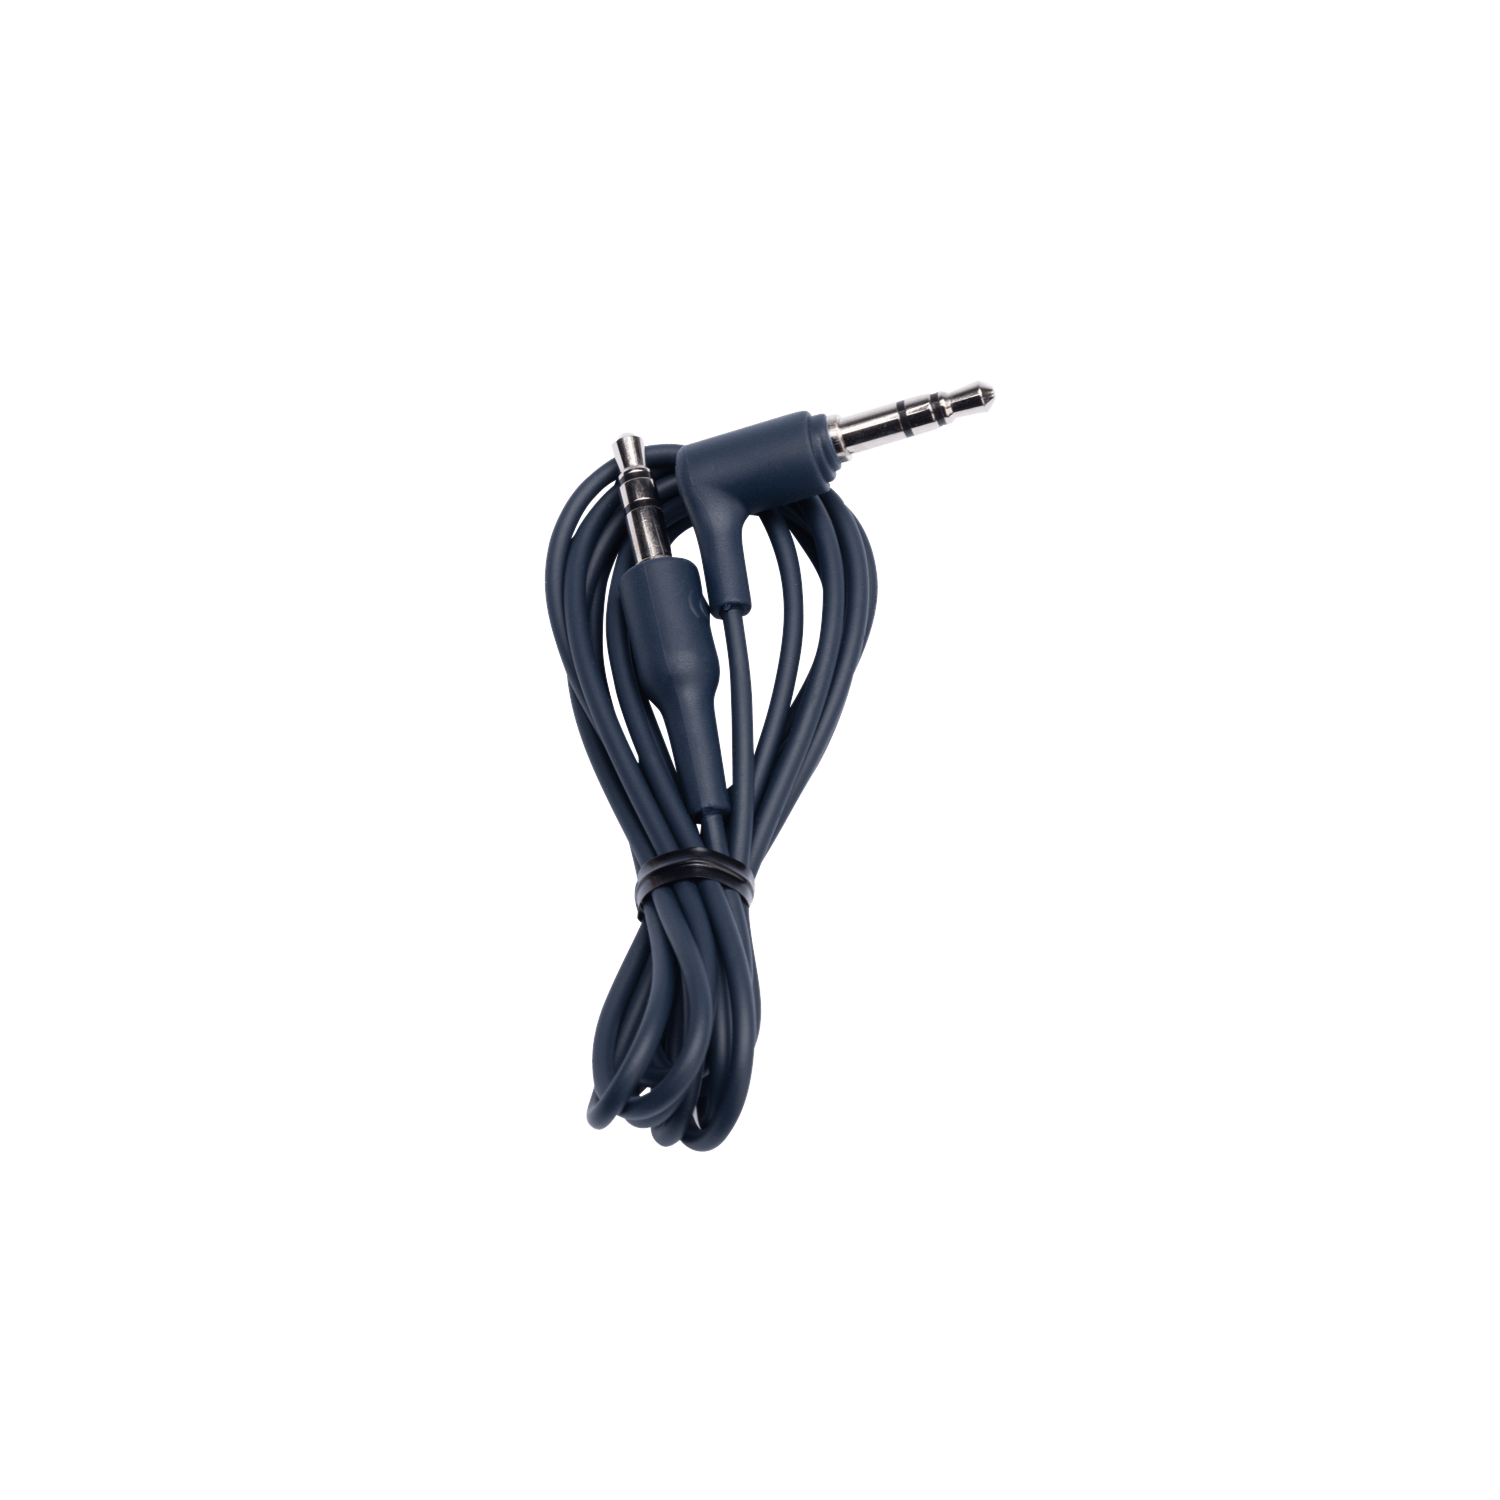 Jabra Audio Cable for Move Style Edition / Elite 85h - Navy